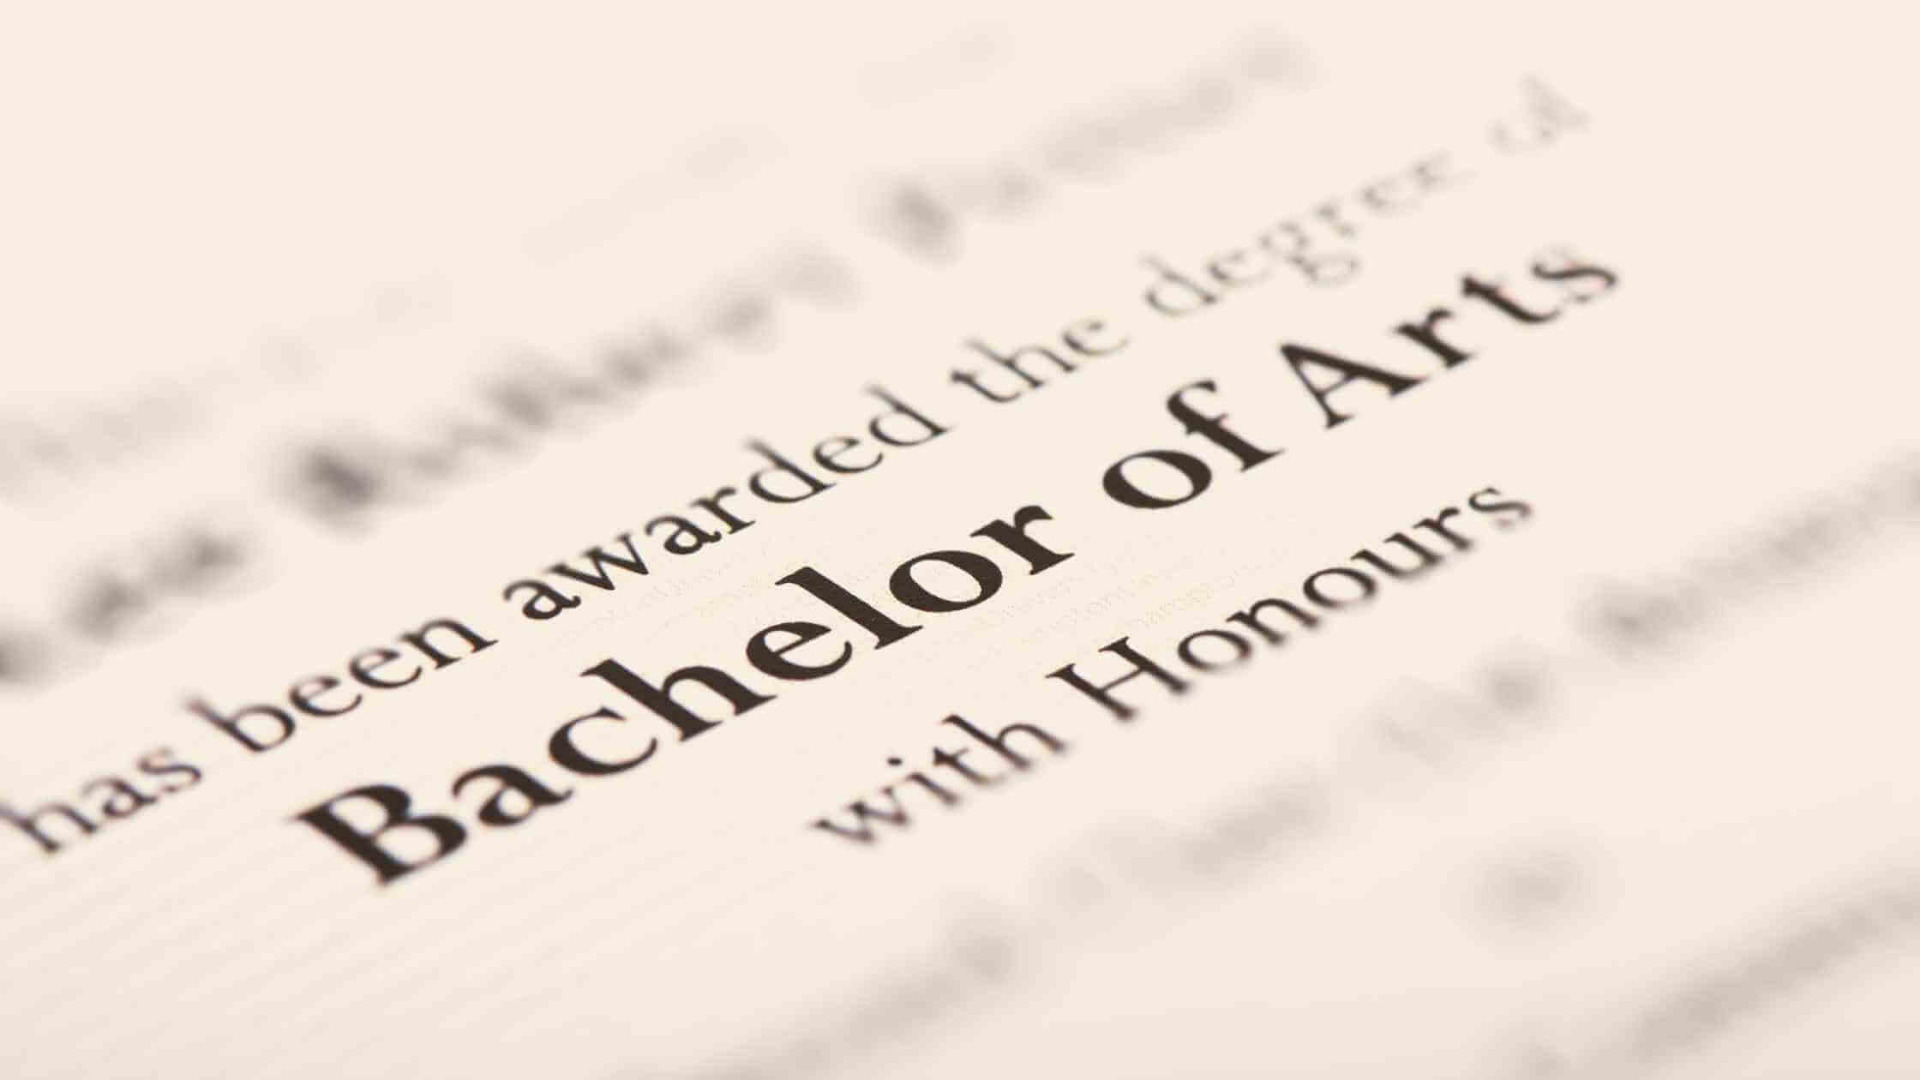 upclose look at bachelor of arts with honours diploma from university